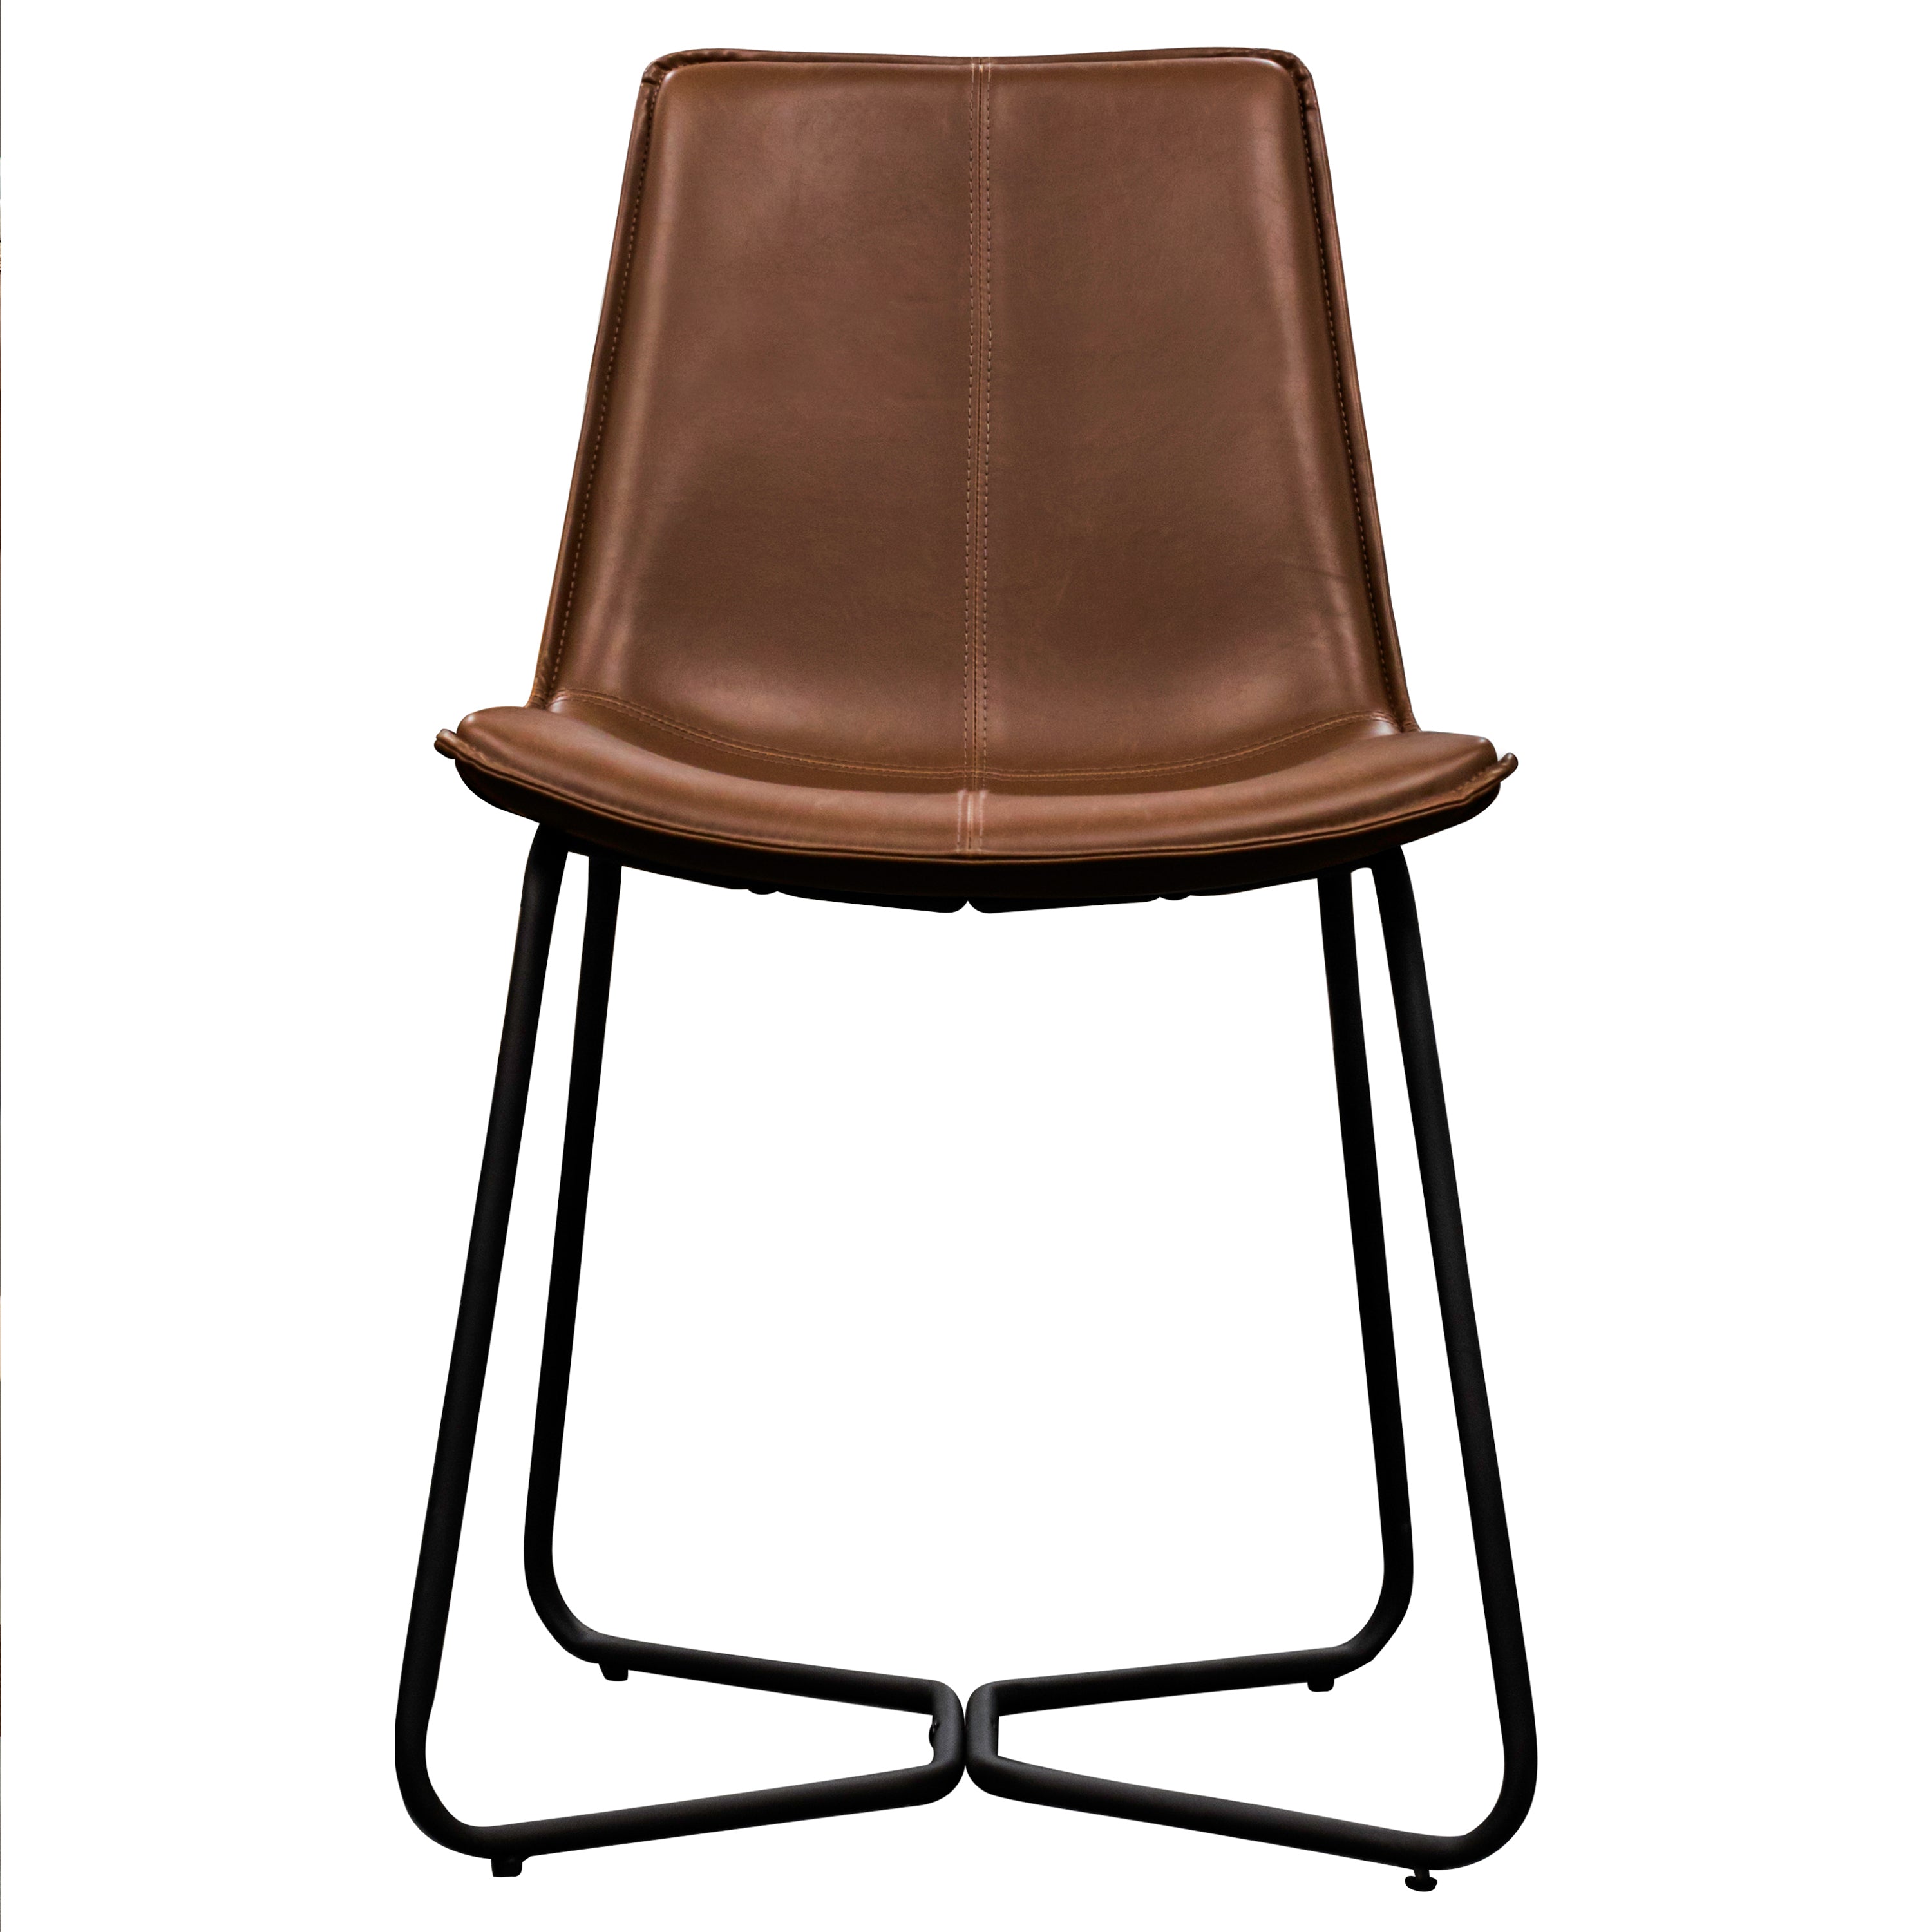 Esso Brown PU Leather Dining Chair - Set of 2